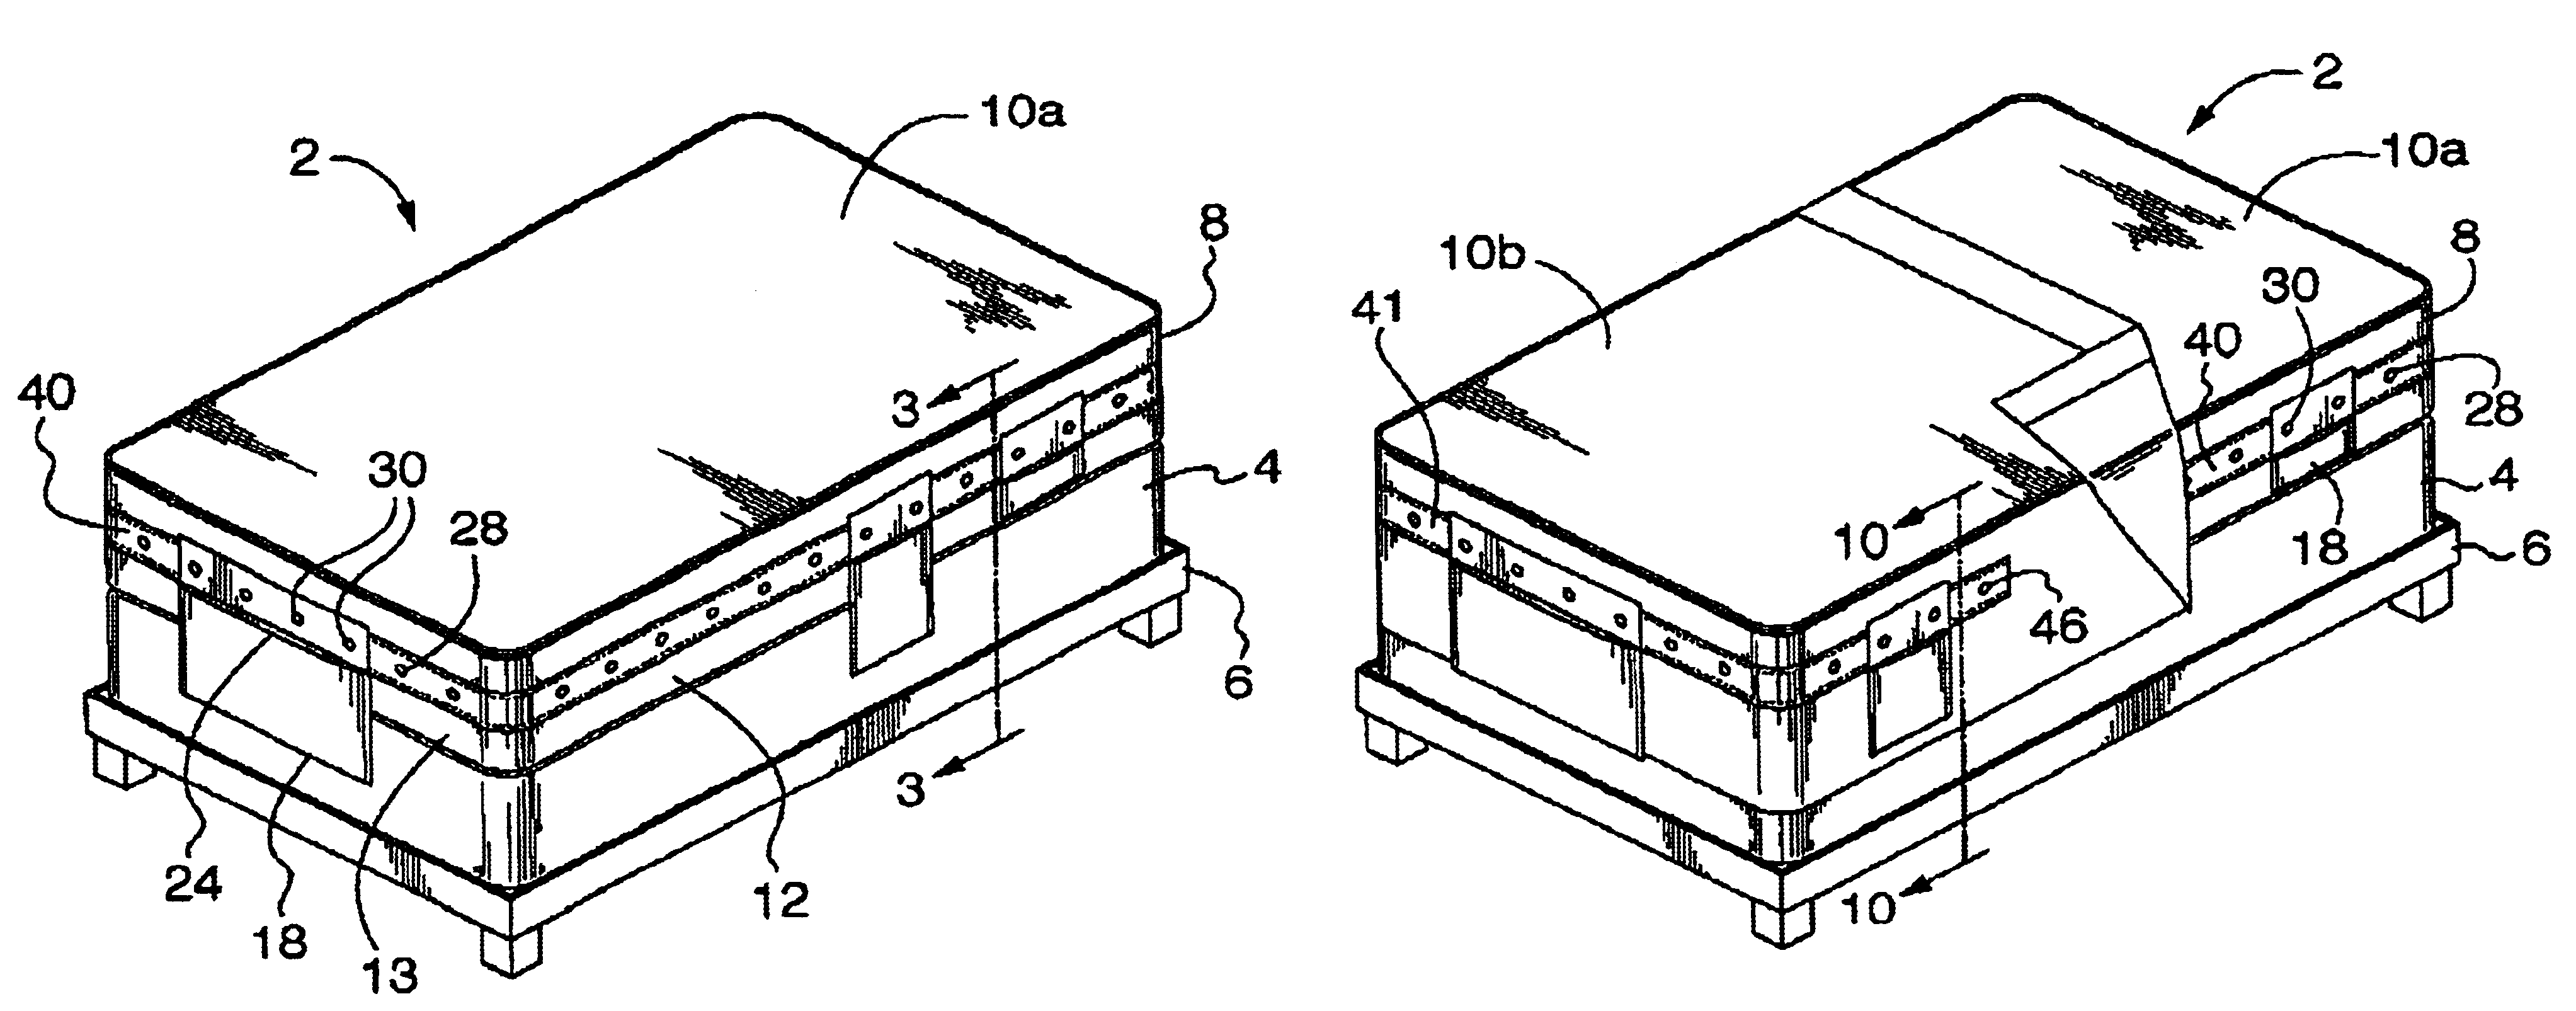 Bed covering fastening system